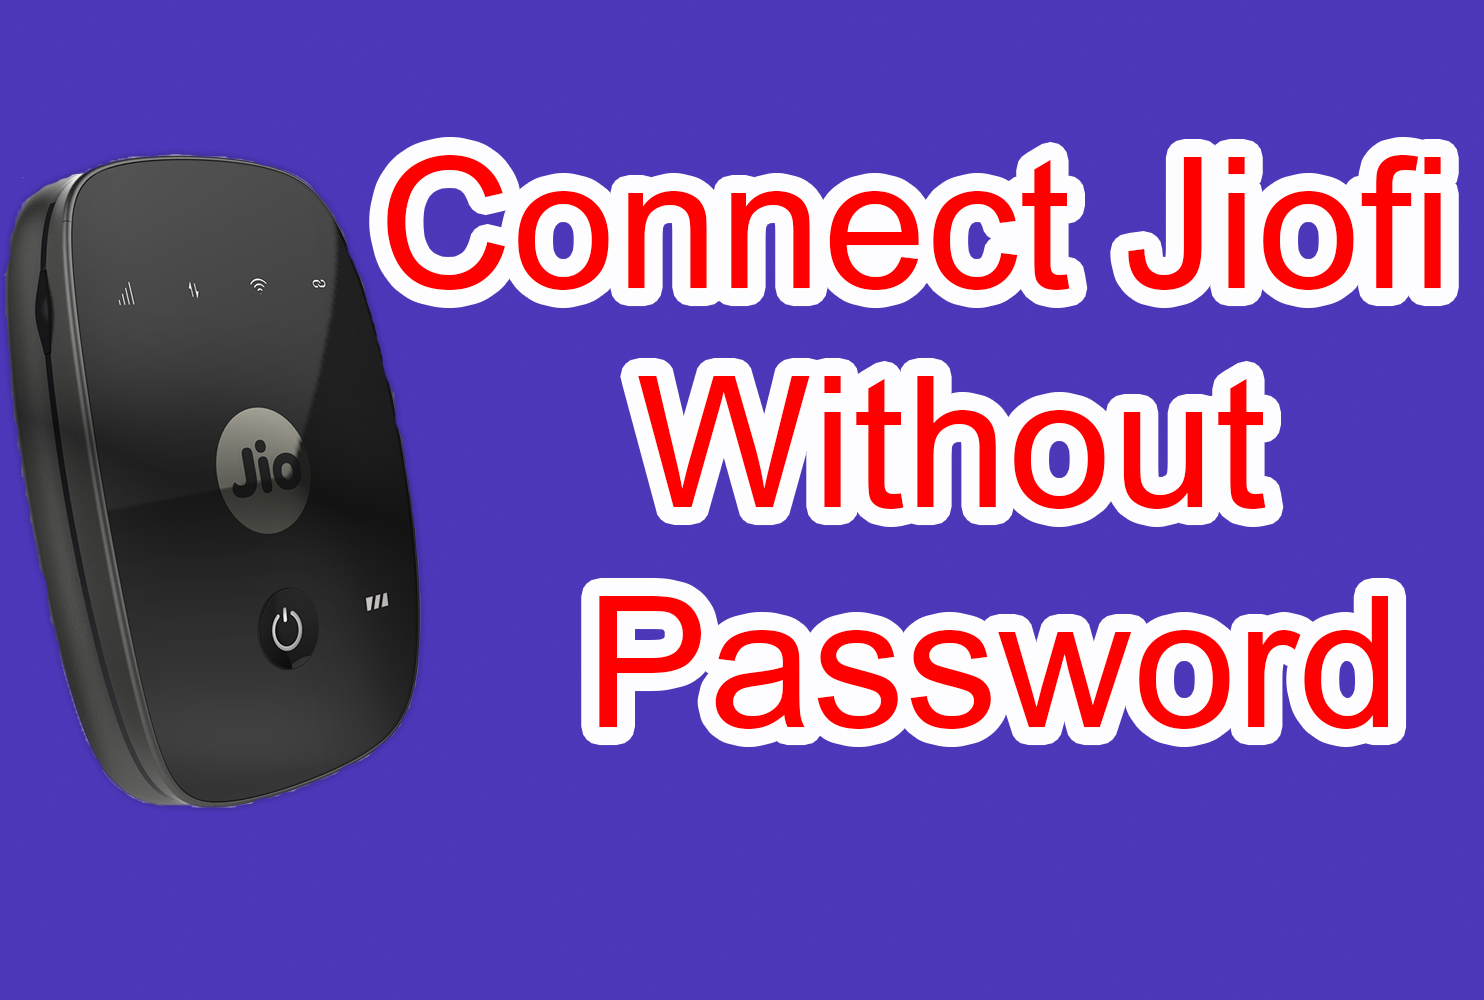 Connect Jiofi Without Password